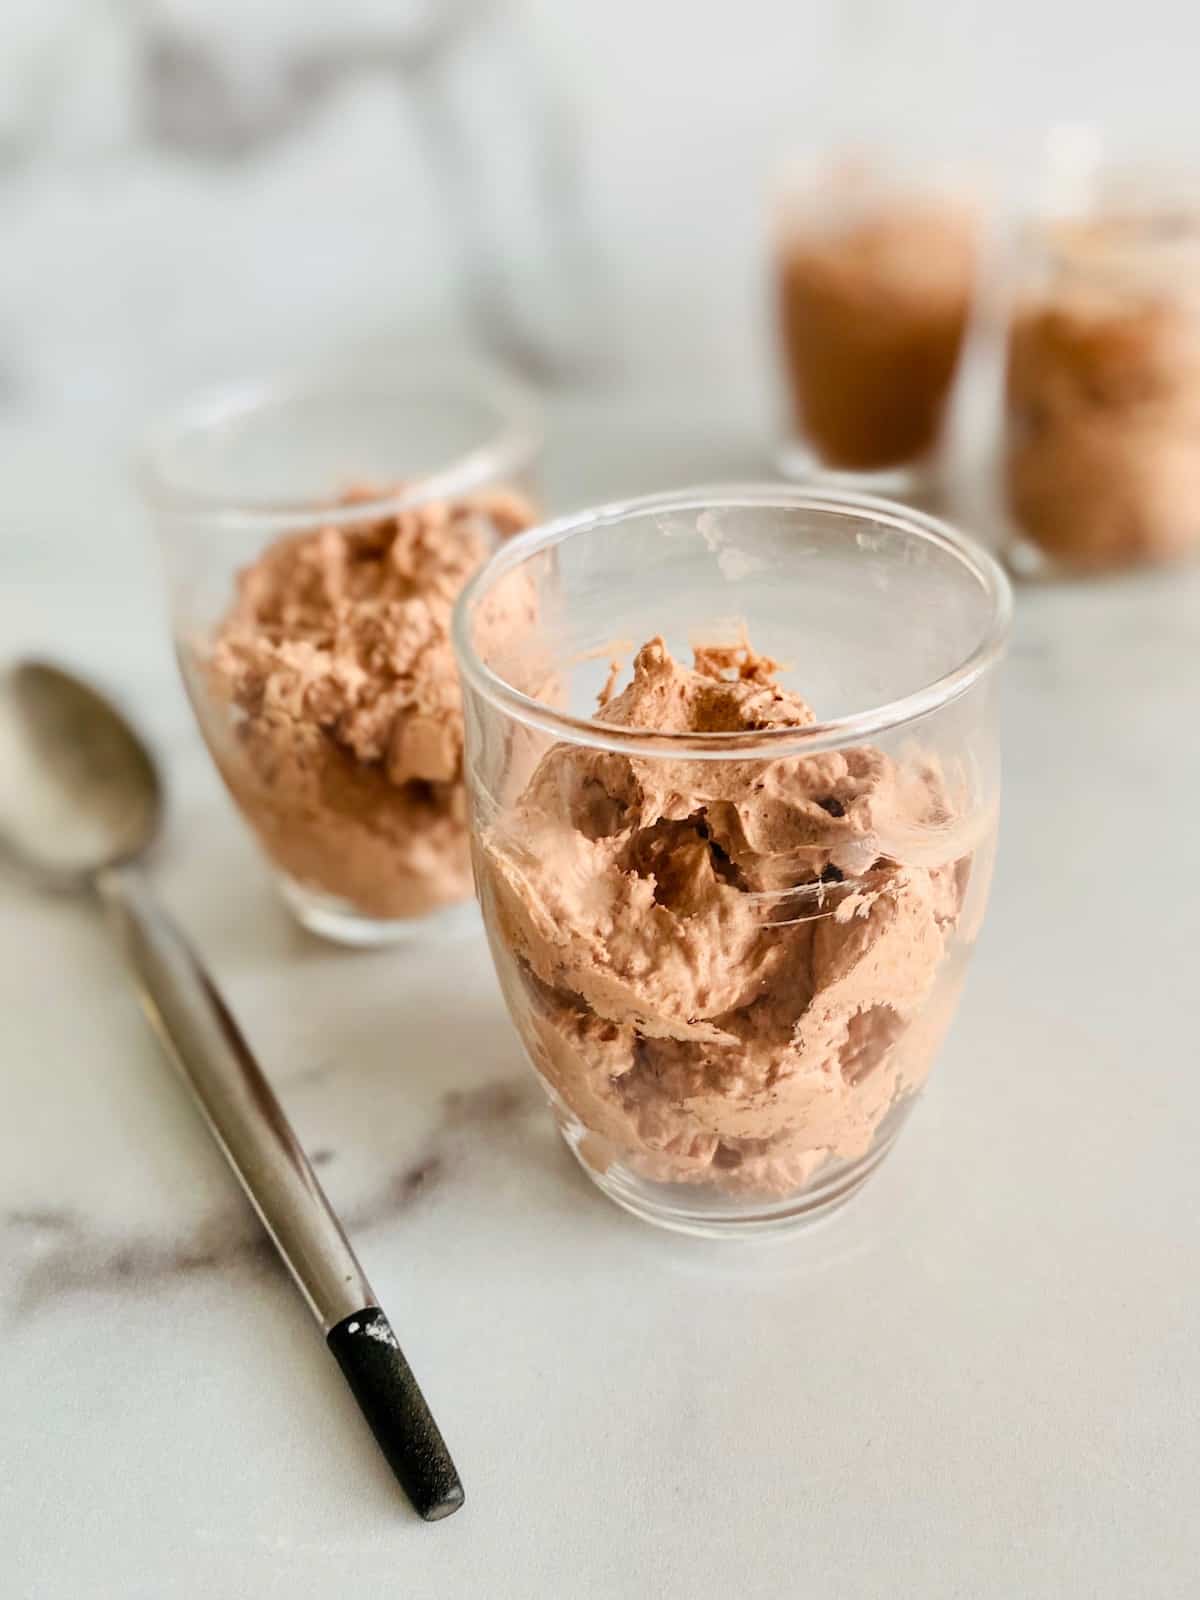 Easy Low-Carb Chocolate Mousse piled into serving glasses with a spoon